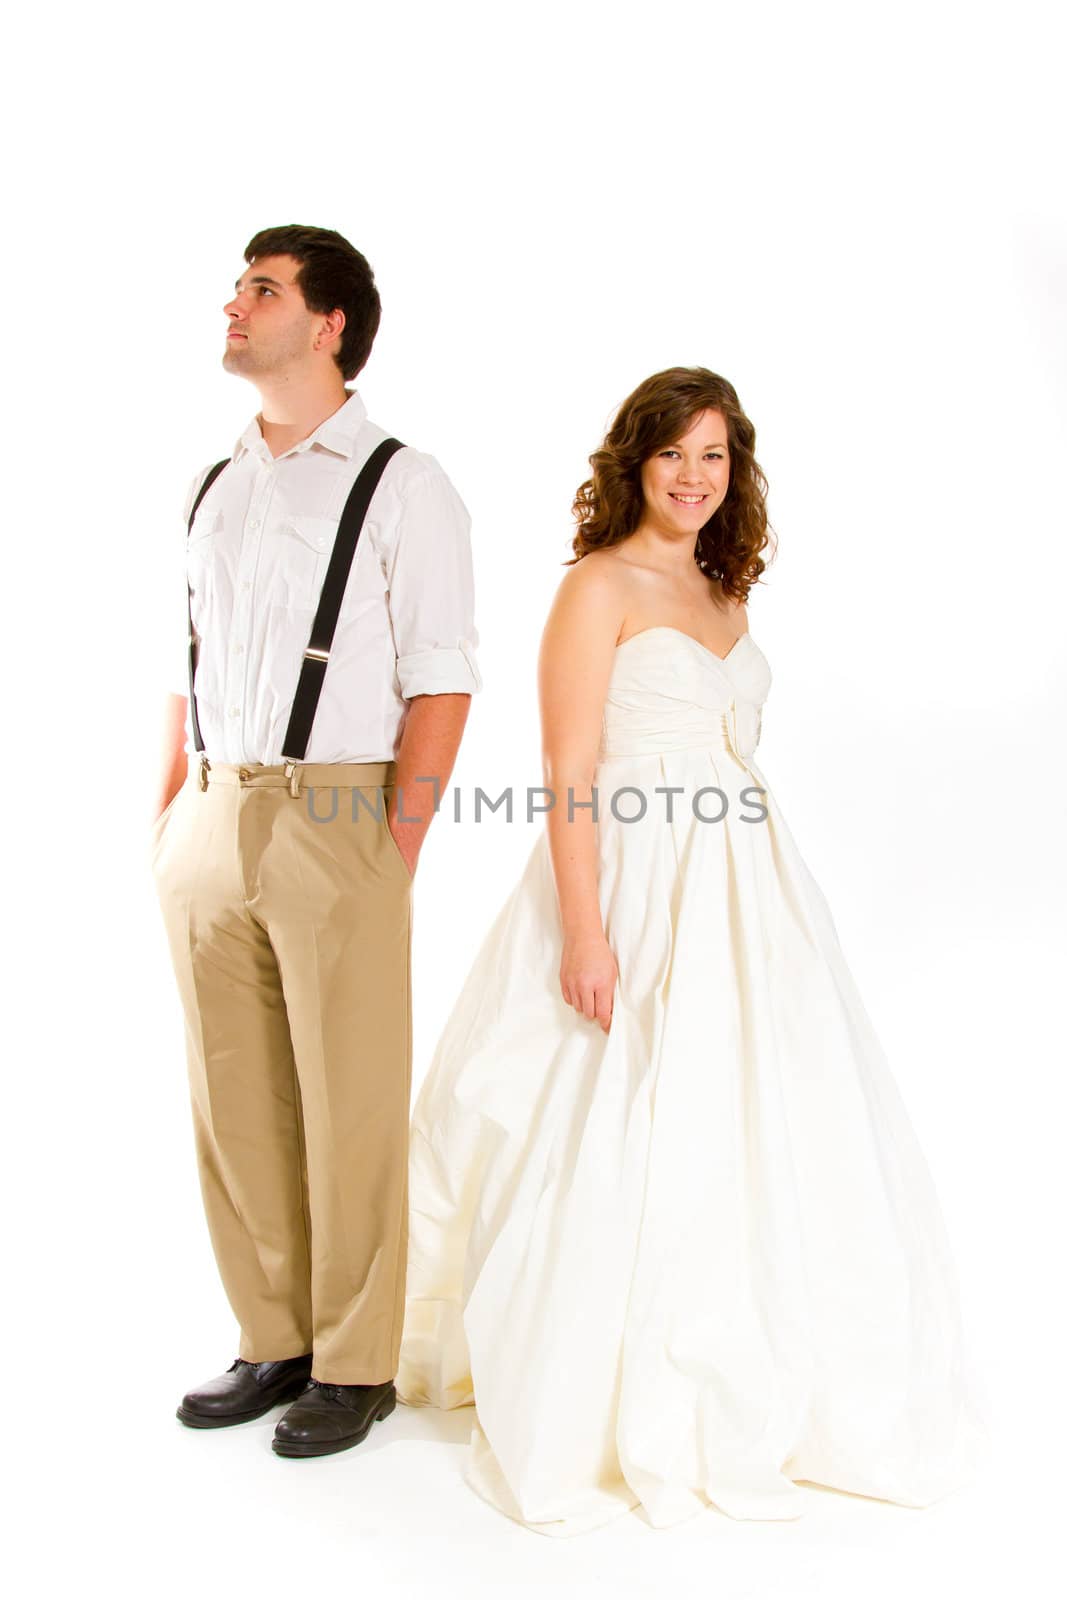 An attractive woman and her handsome husband wear their wedding attire in the studio agains an isolated white background.